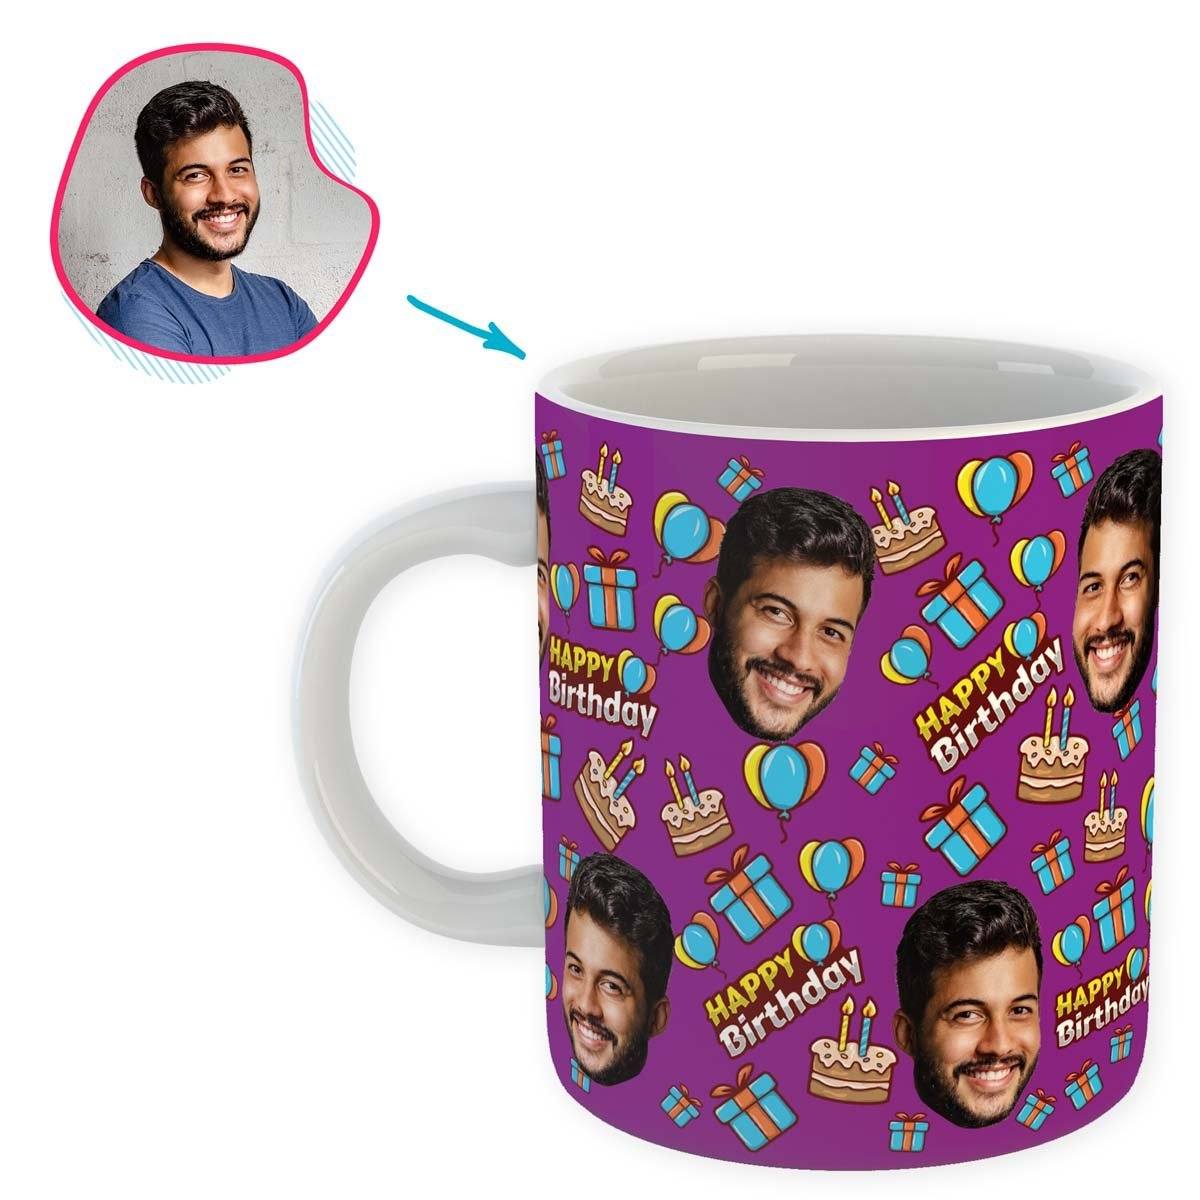 purple Birthday mug personalized with photo of face printed on it